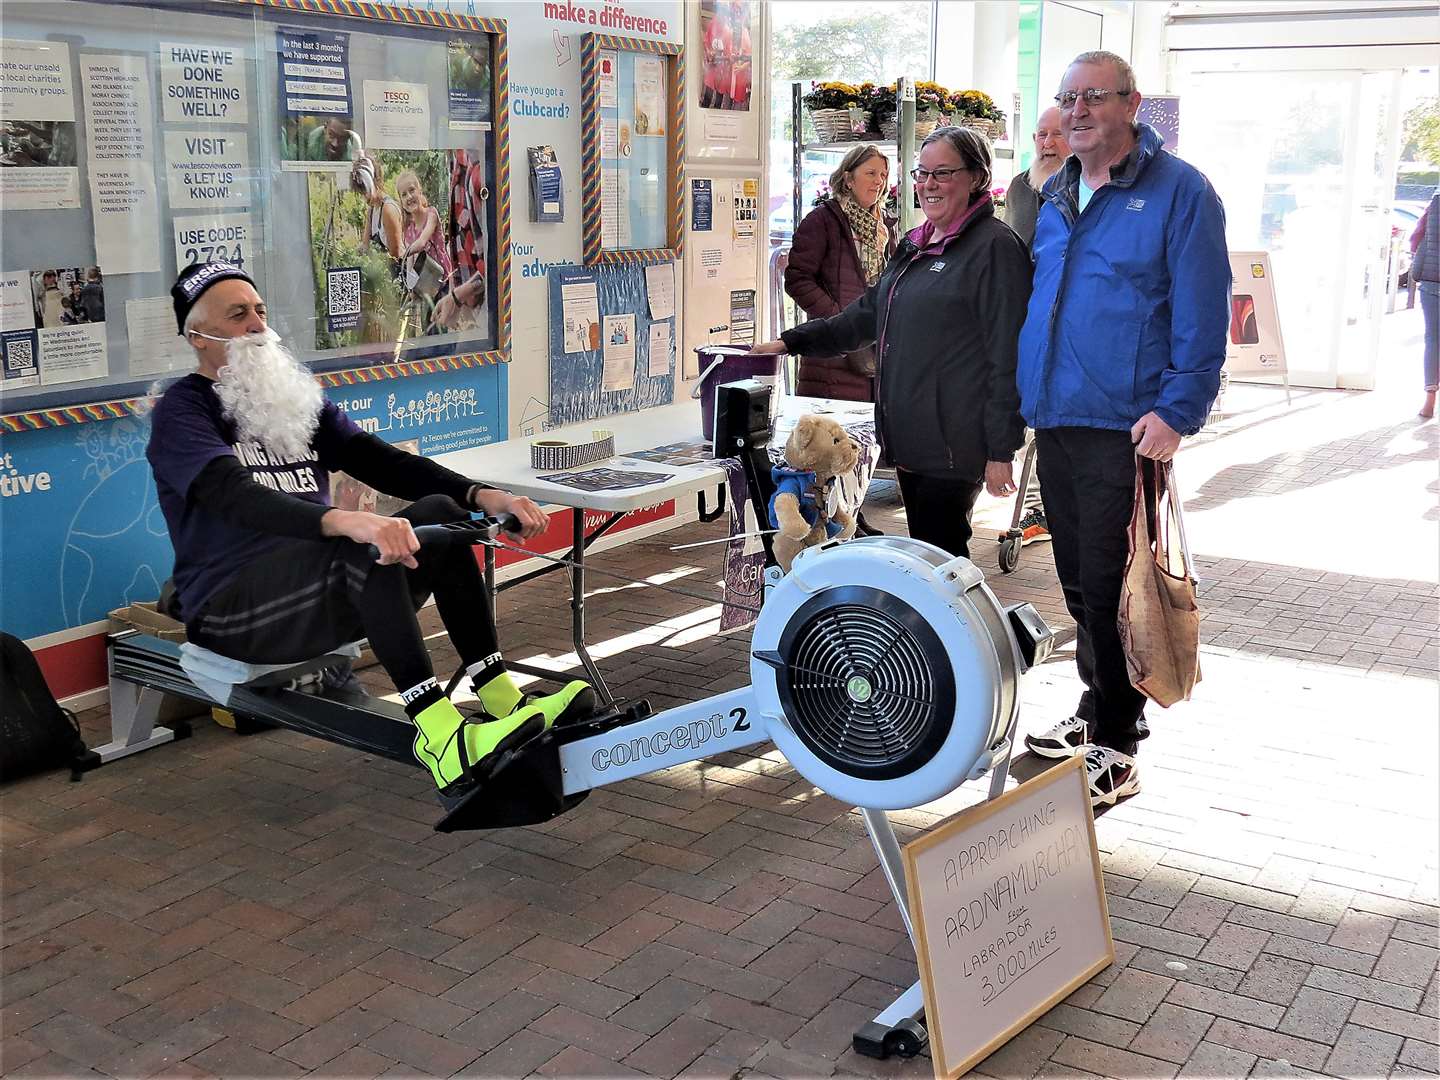 Johnnie Baillie finishing his Atlantic row on 16th October at Inshes Tesco store.